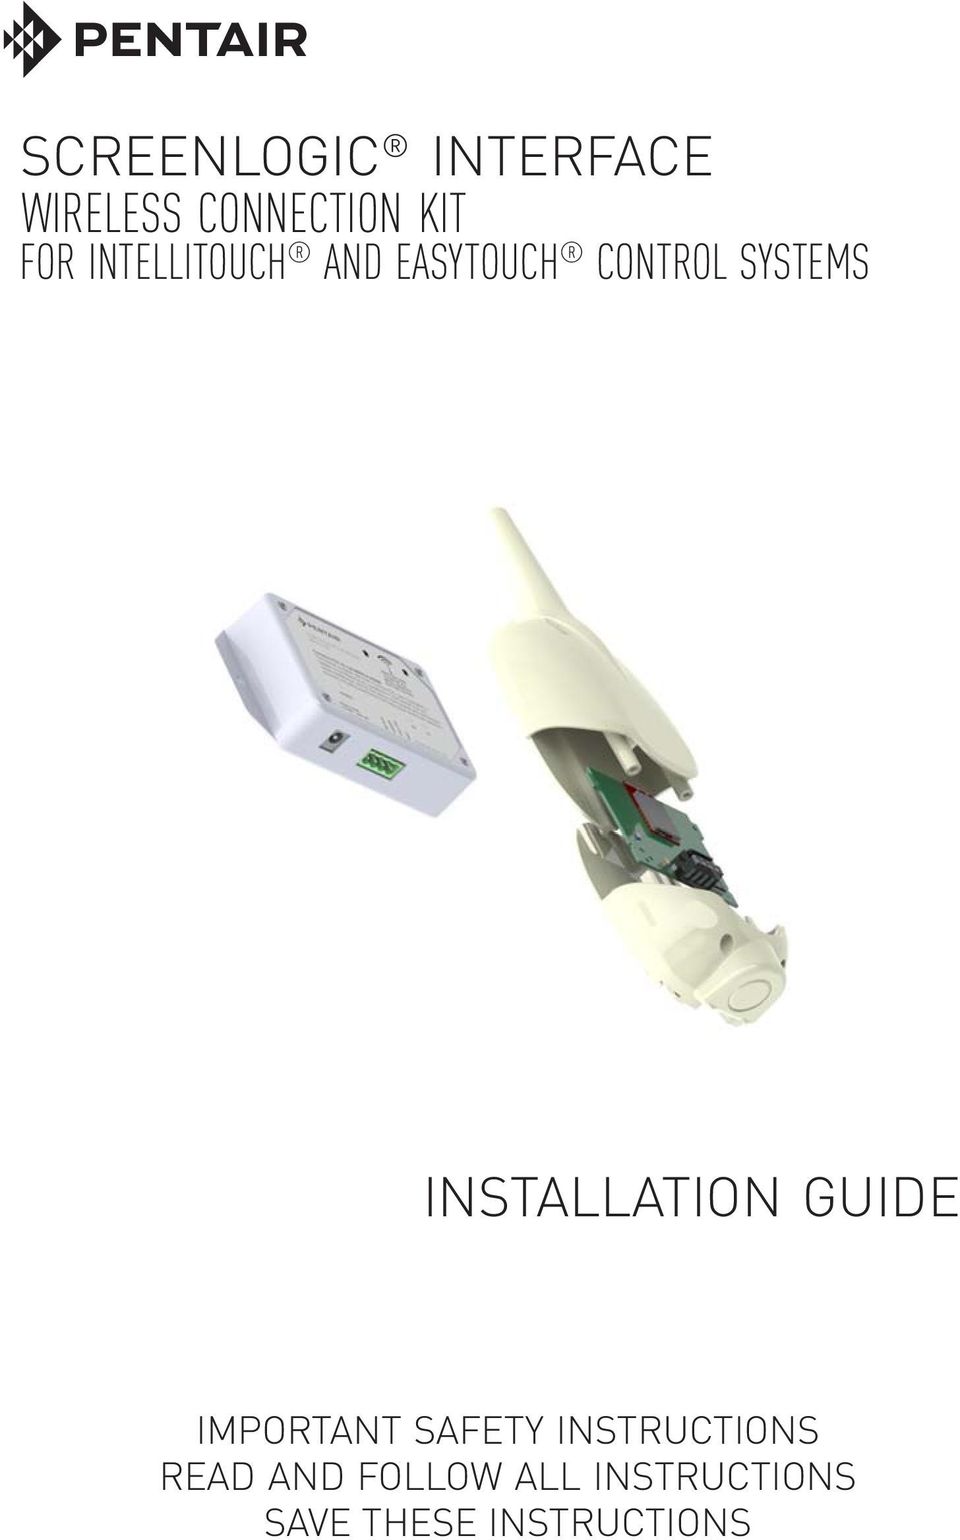 INSTALLATION GUIDE IMPORTANT SAFETY INSTRUCTIONS